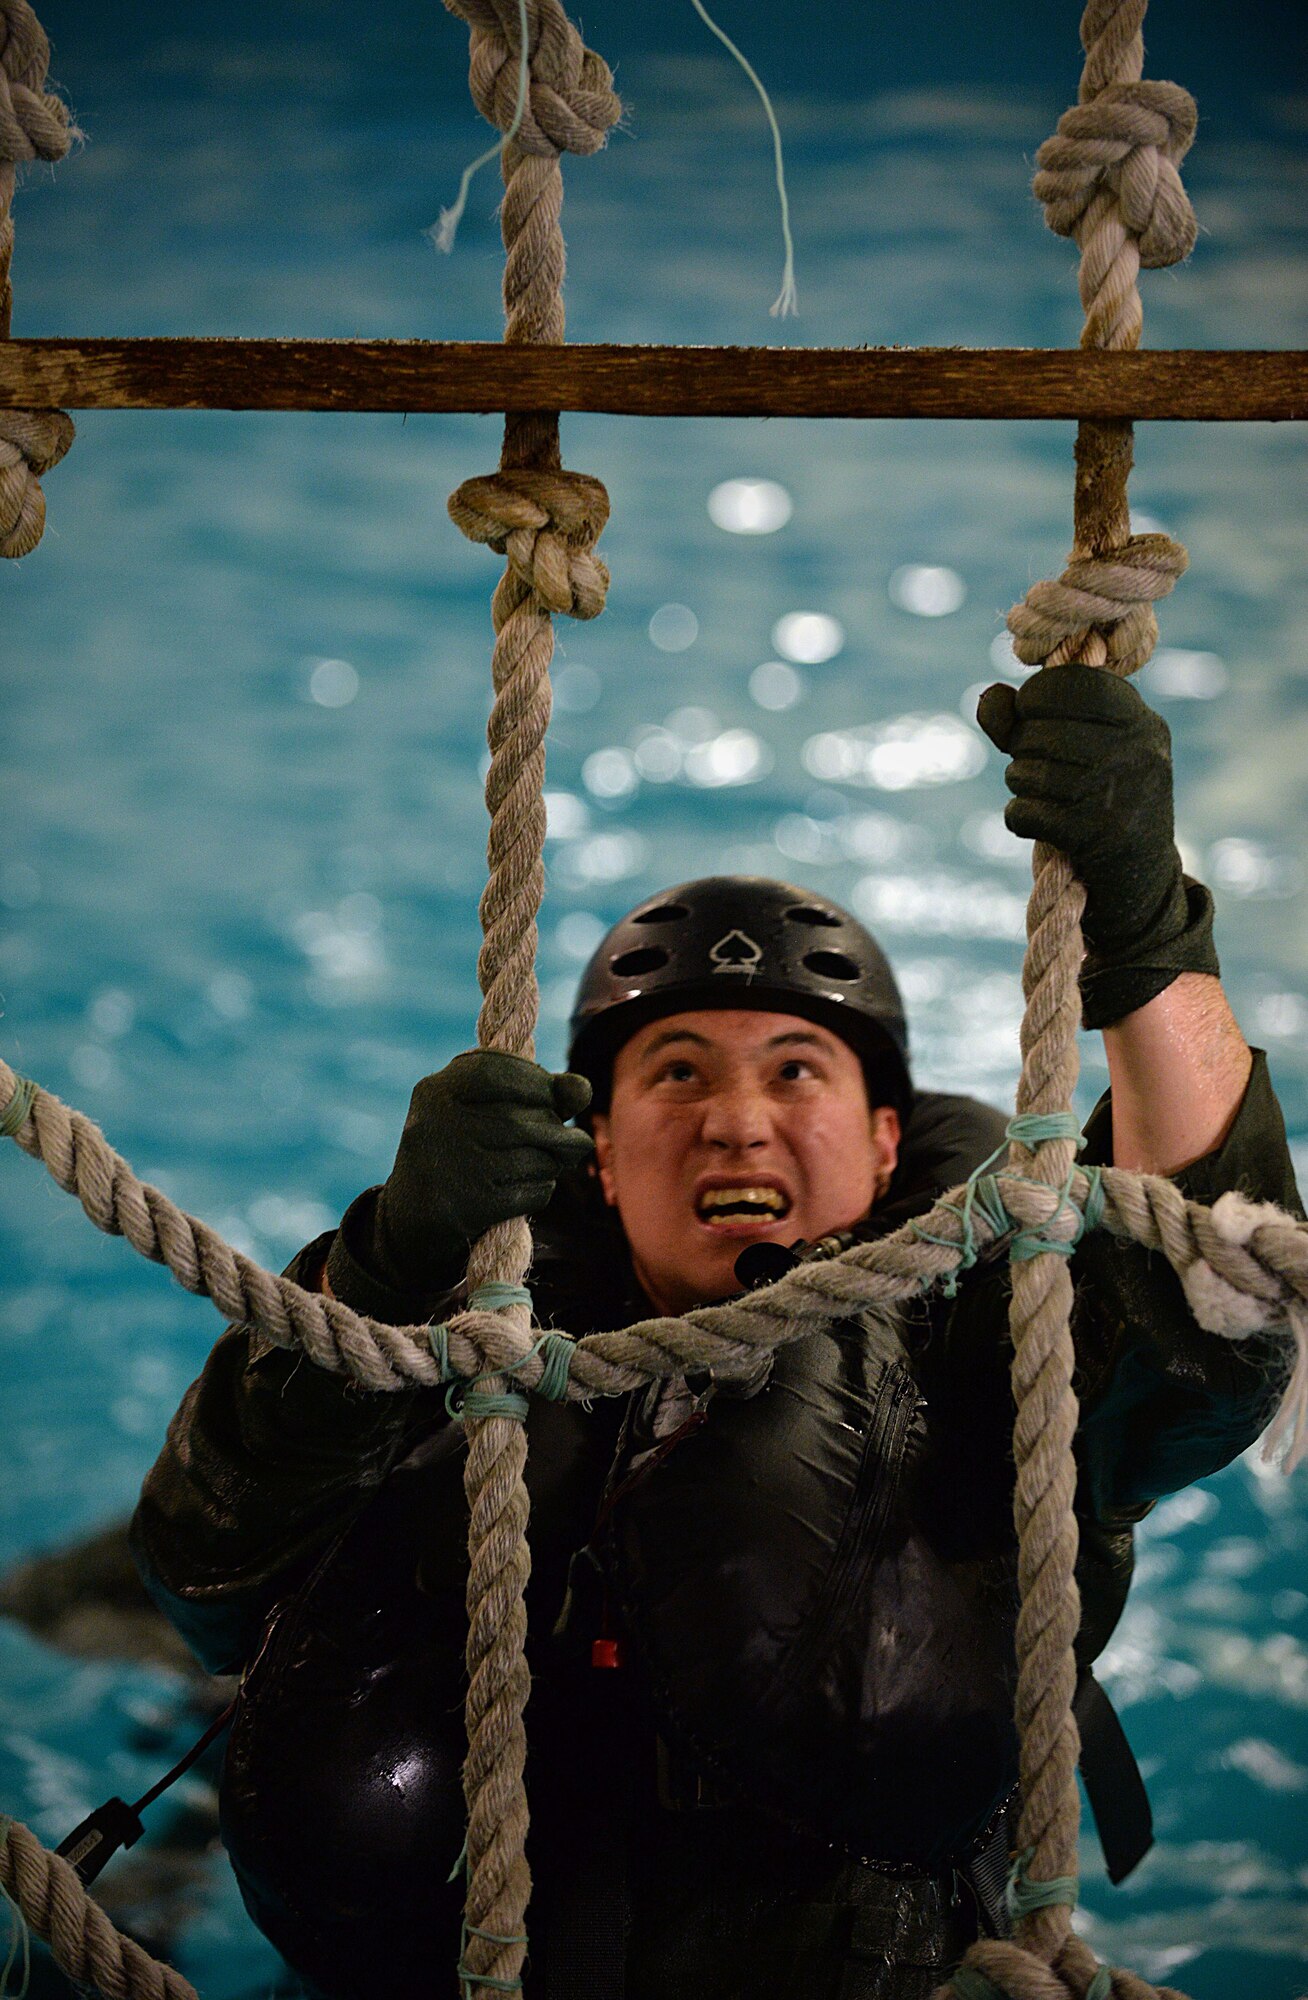 A U.S. Air Force Air Commando from the 352nd Special Operation Wing, climbs a cargo net ladder during Survival, Evasion, Resistance and Escape Water Survival Training March 10, 2017, at Lowestoft College, Maritime and Offshore Facilities, England. Climbing the ladder simulated what it would be like to climb into an aircraft if stuck in the middle of the ocean. (U.S. Air Force photo by Senior Airman Christine Halan)